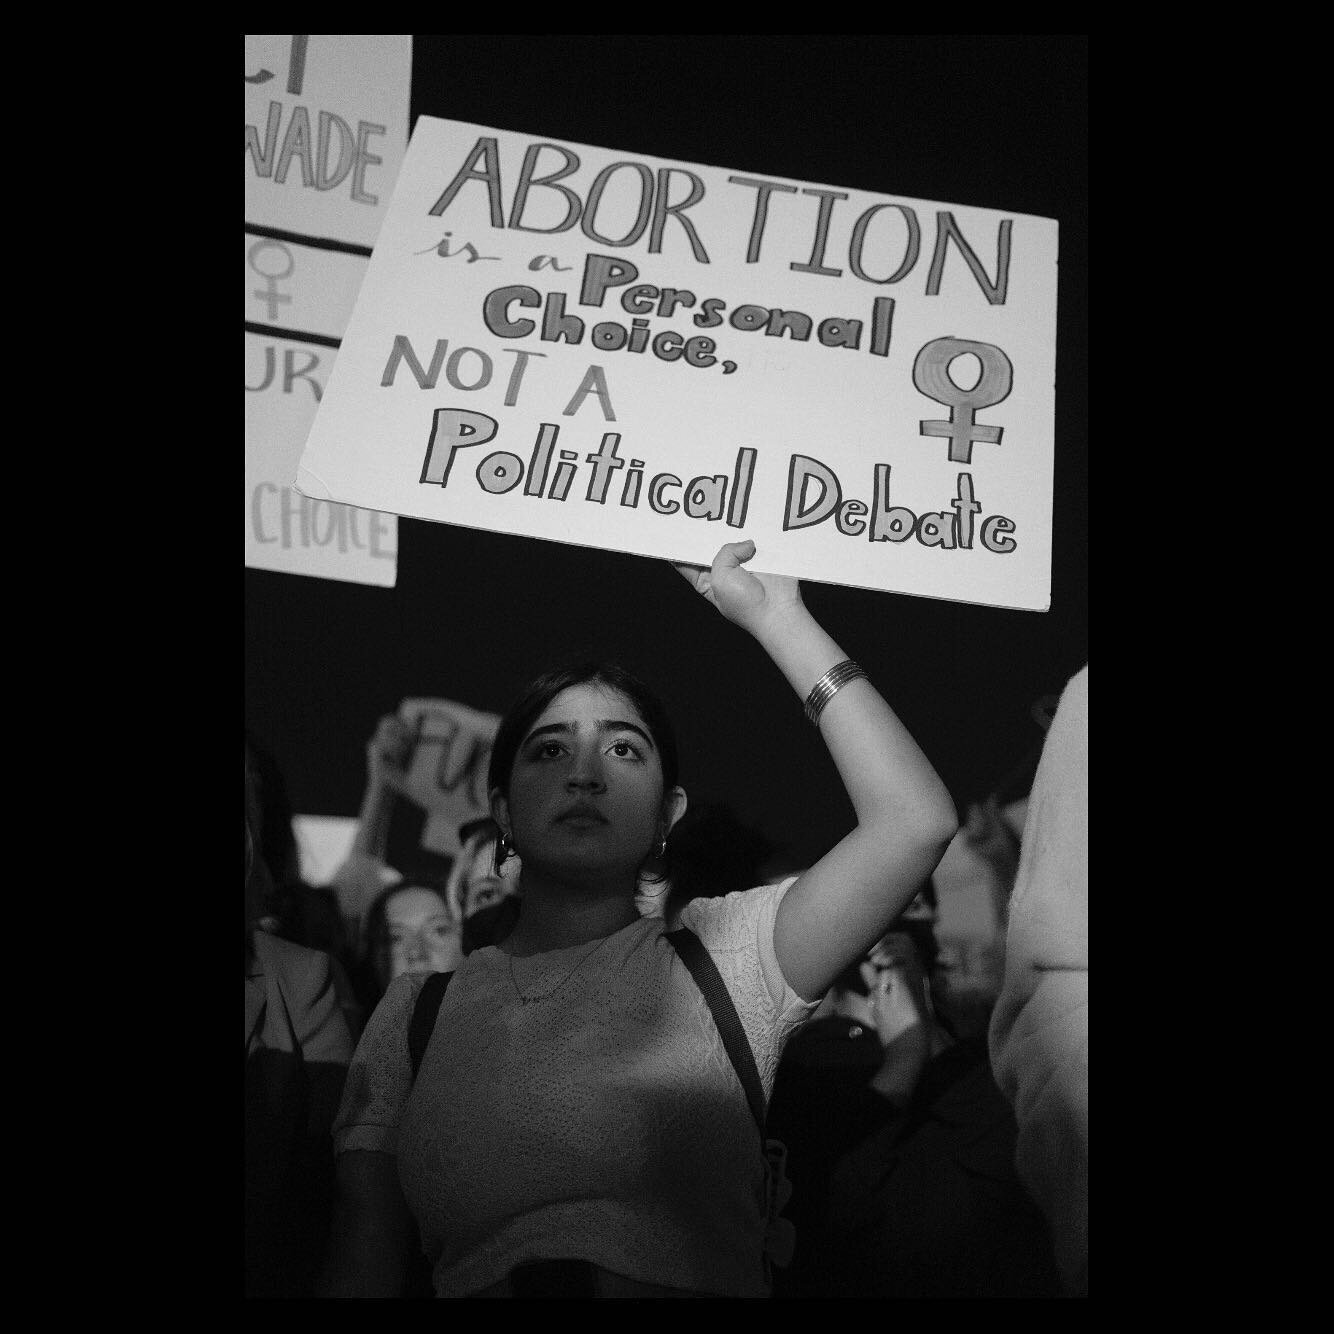 Last night, it was leaked that the Supreme Court is going to overturn Roe versus Wade. In response hundreds of men and woman gathered in front of the Supreme Court on May 2, 2022.